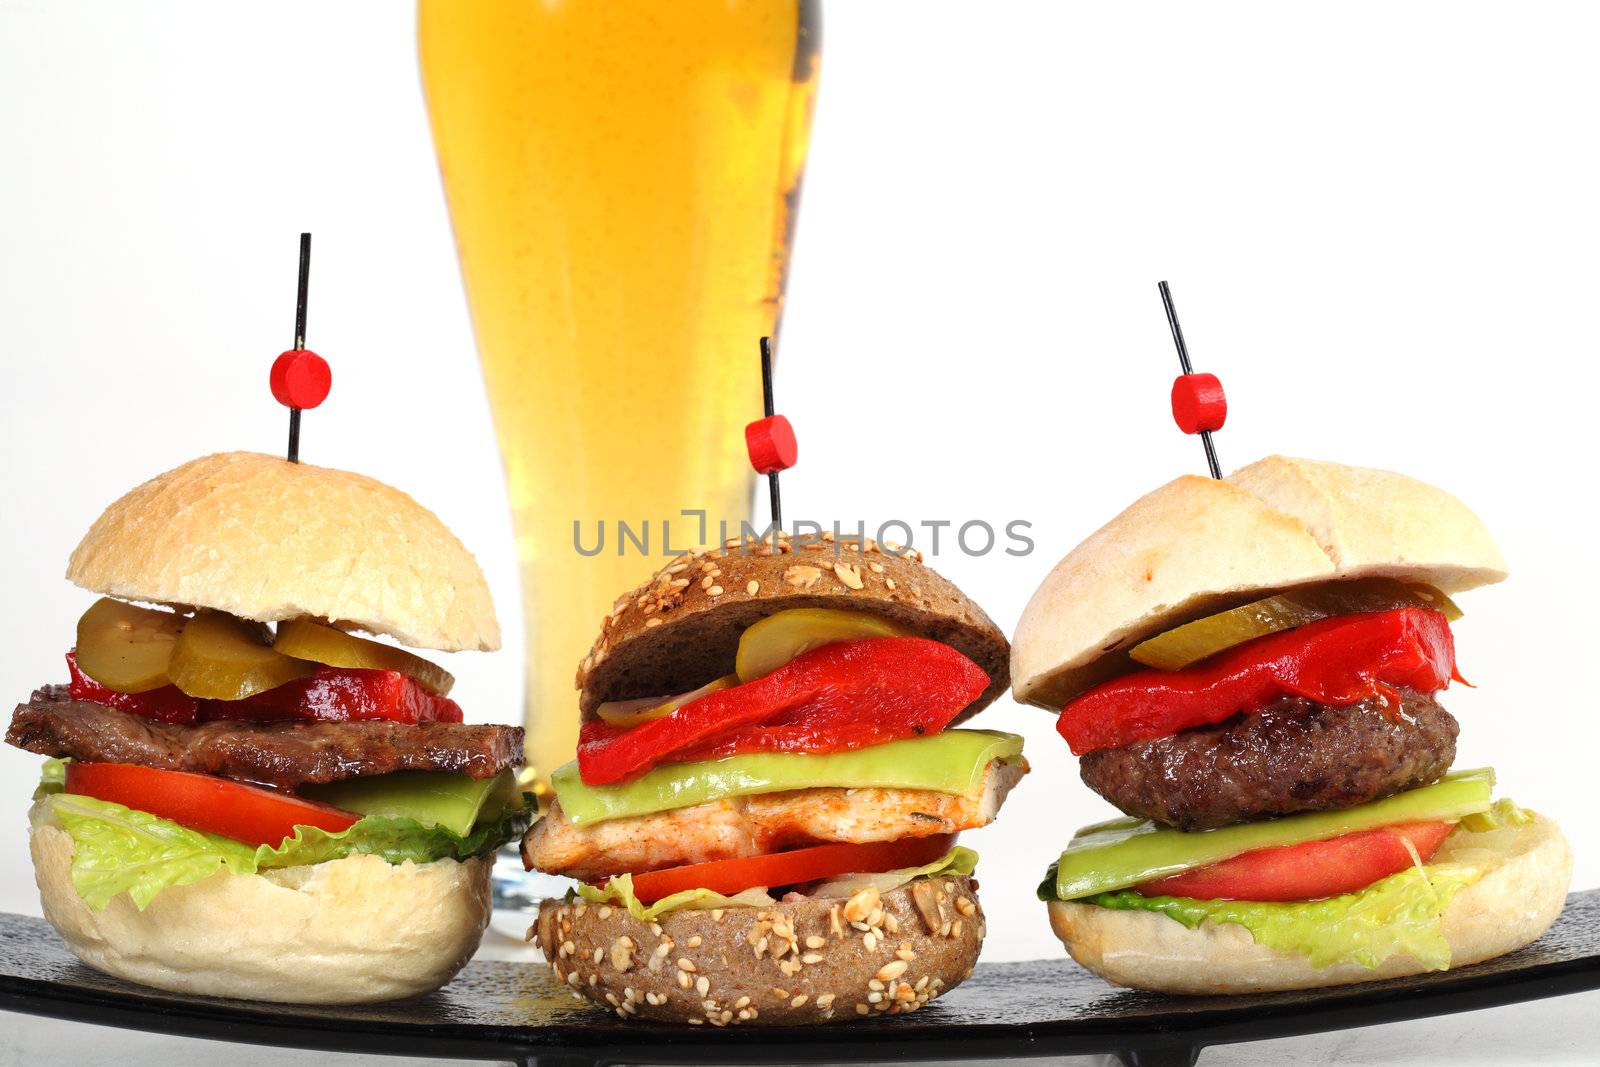 Three hamburgers on plate with glass of beer